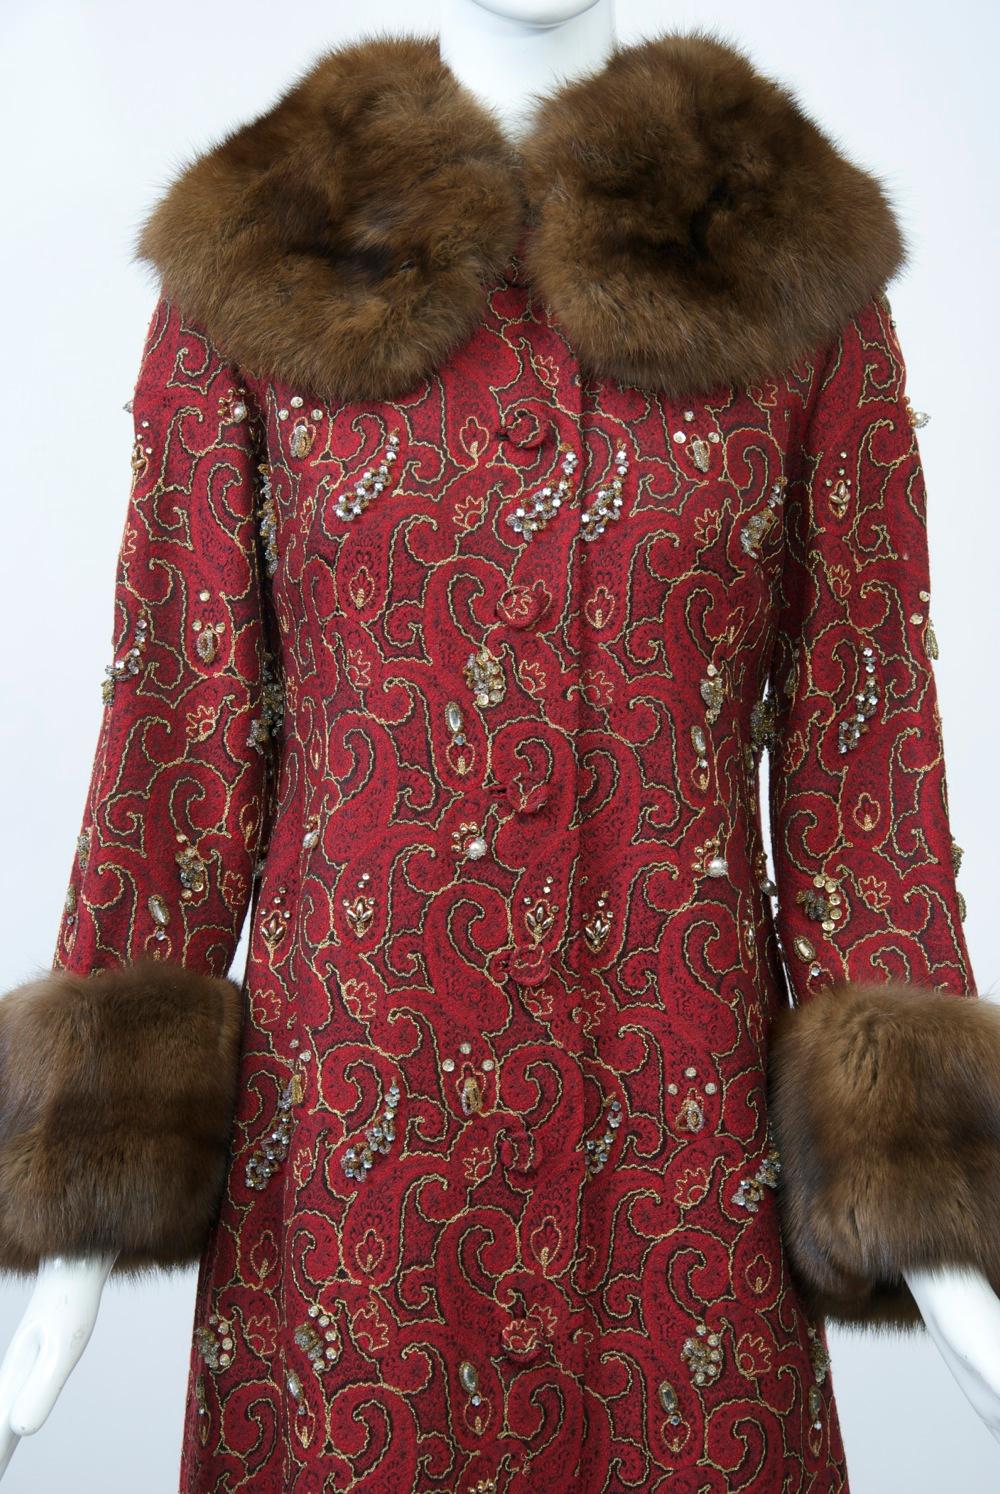 A full-length evening coat crafted out of a lightweight red brocade fabric that is embellished with metallic gold thread outlining the motifs and clusters of beading throughout. Further enhancing this luxurious piece are the sable cuffs and full